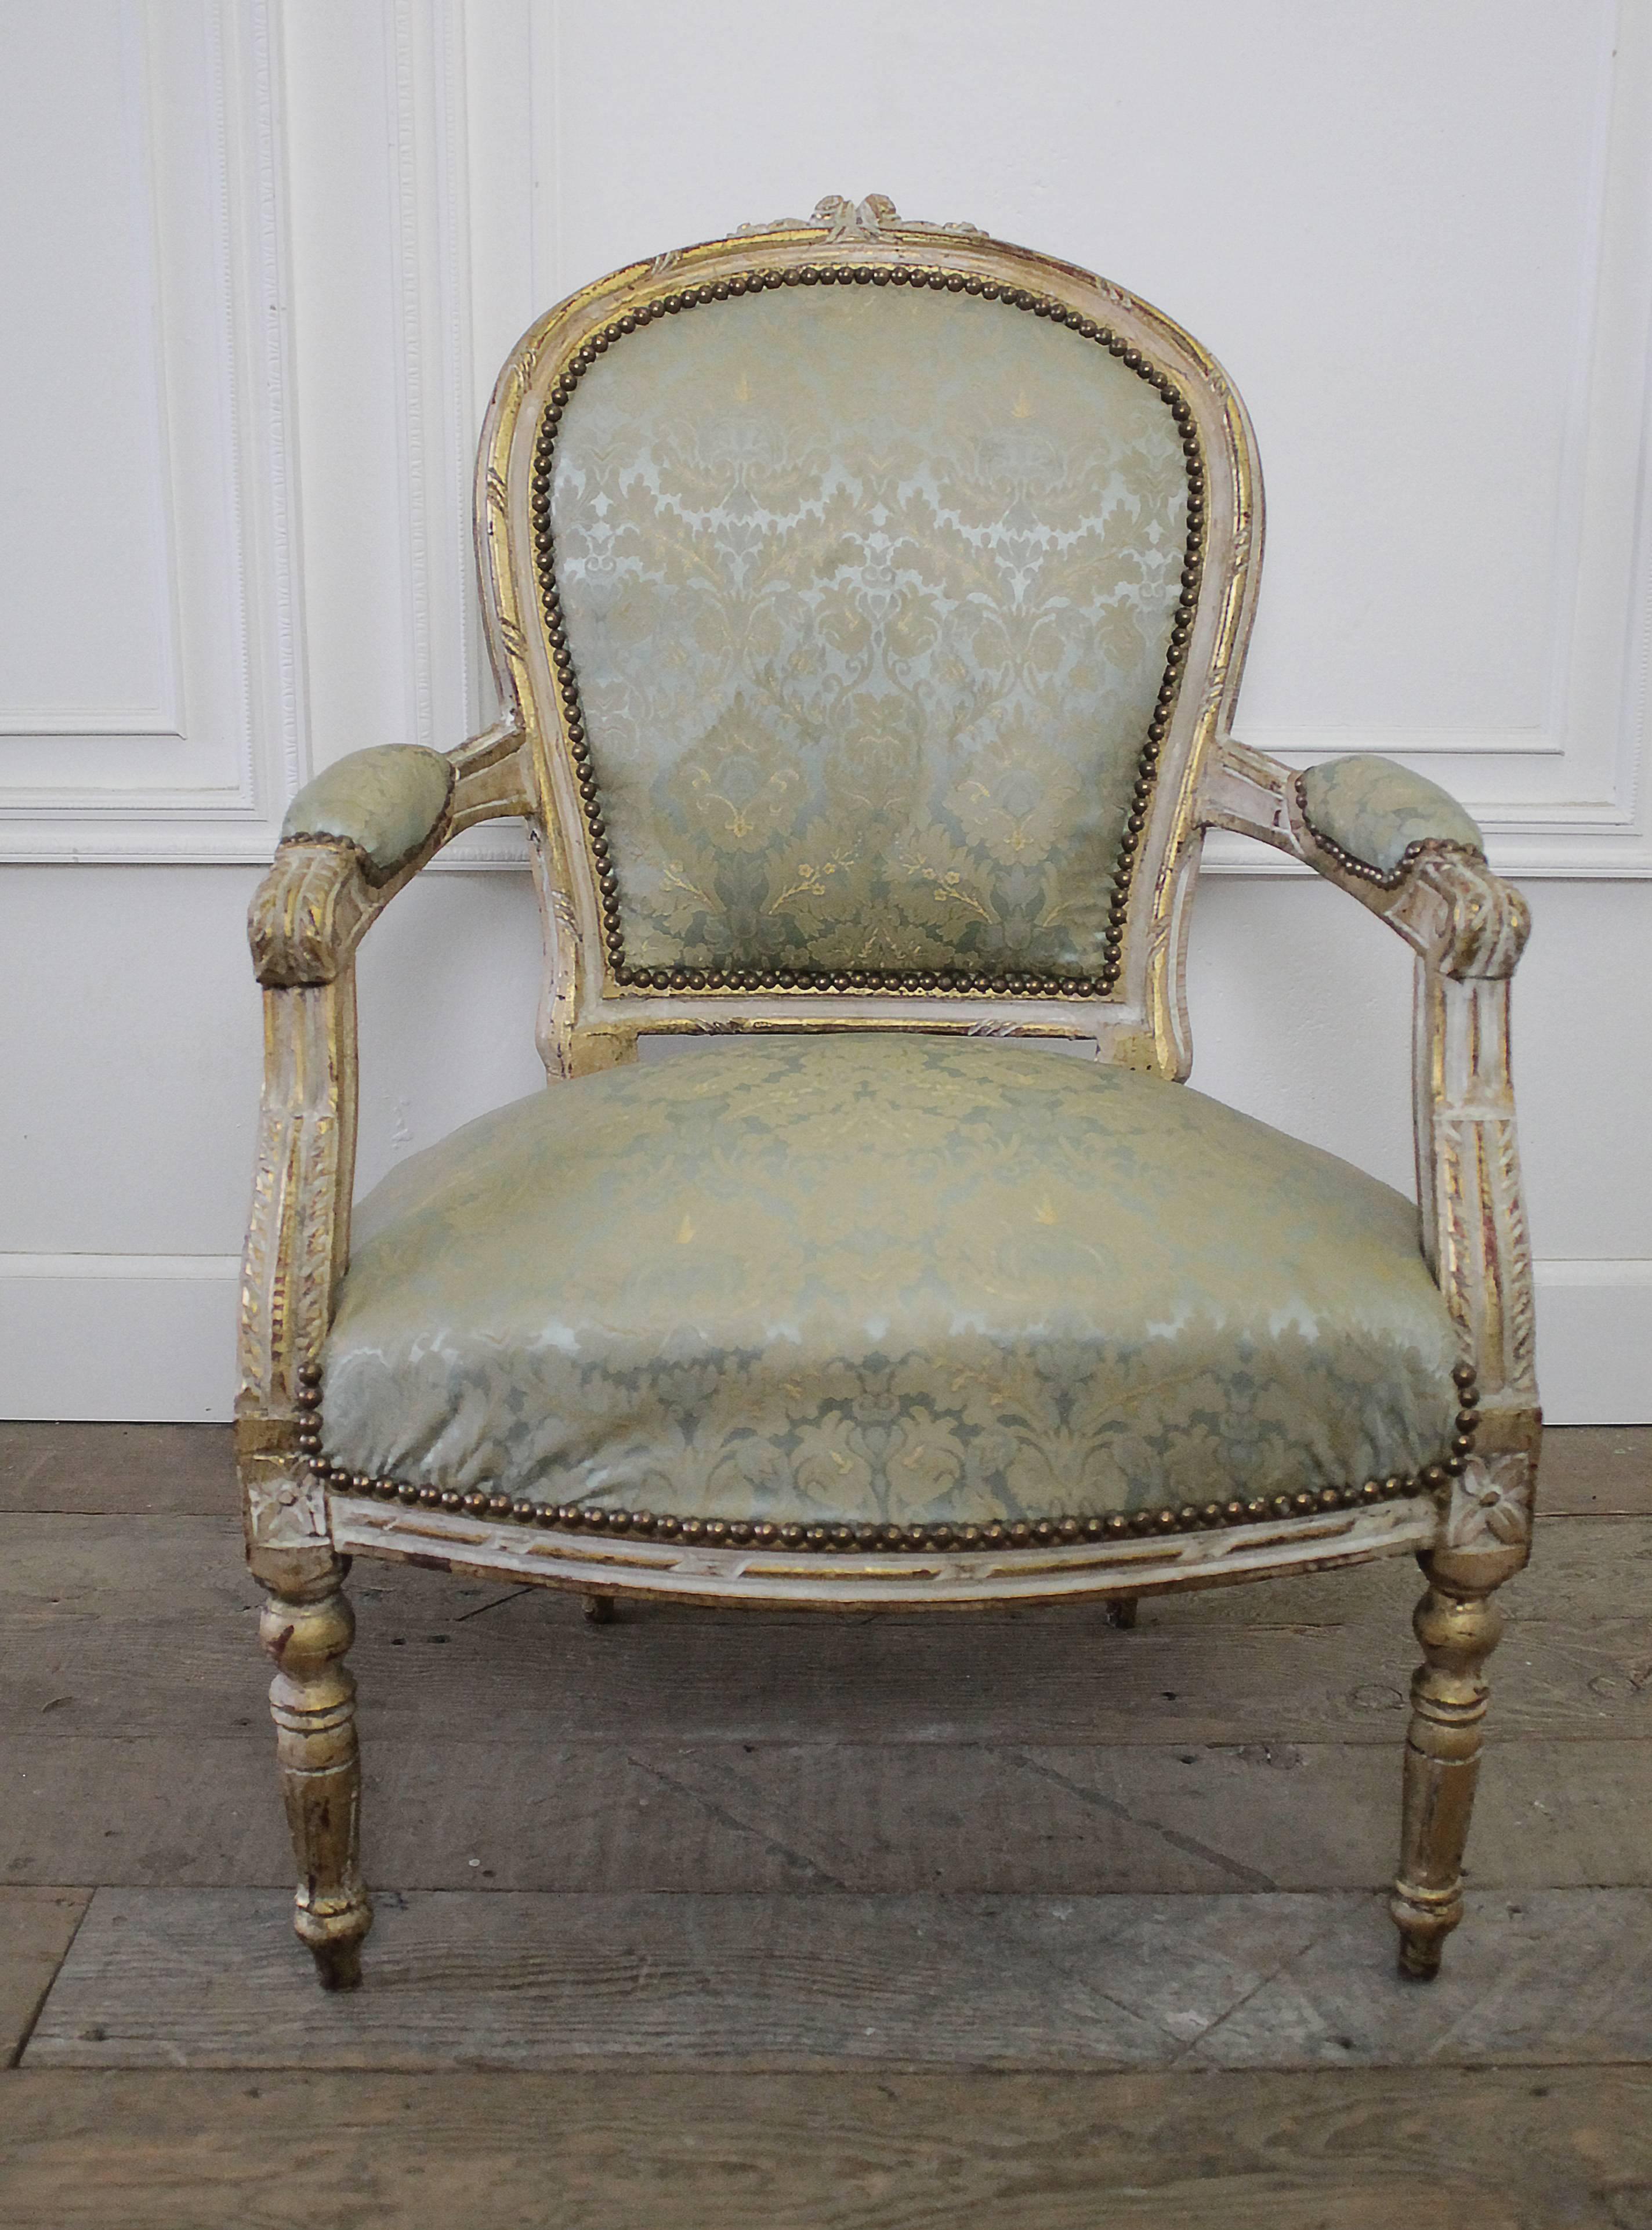 Beautiful French Louis XVI style gilt chair with original upholstery and nailhead trim. The frame of the chair has a wonderful worn patina, with chipping and fading througout. Very petite rose and leaf carvings on the top of the chair, with an